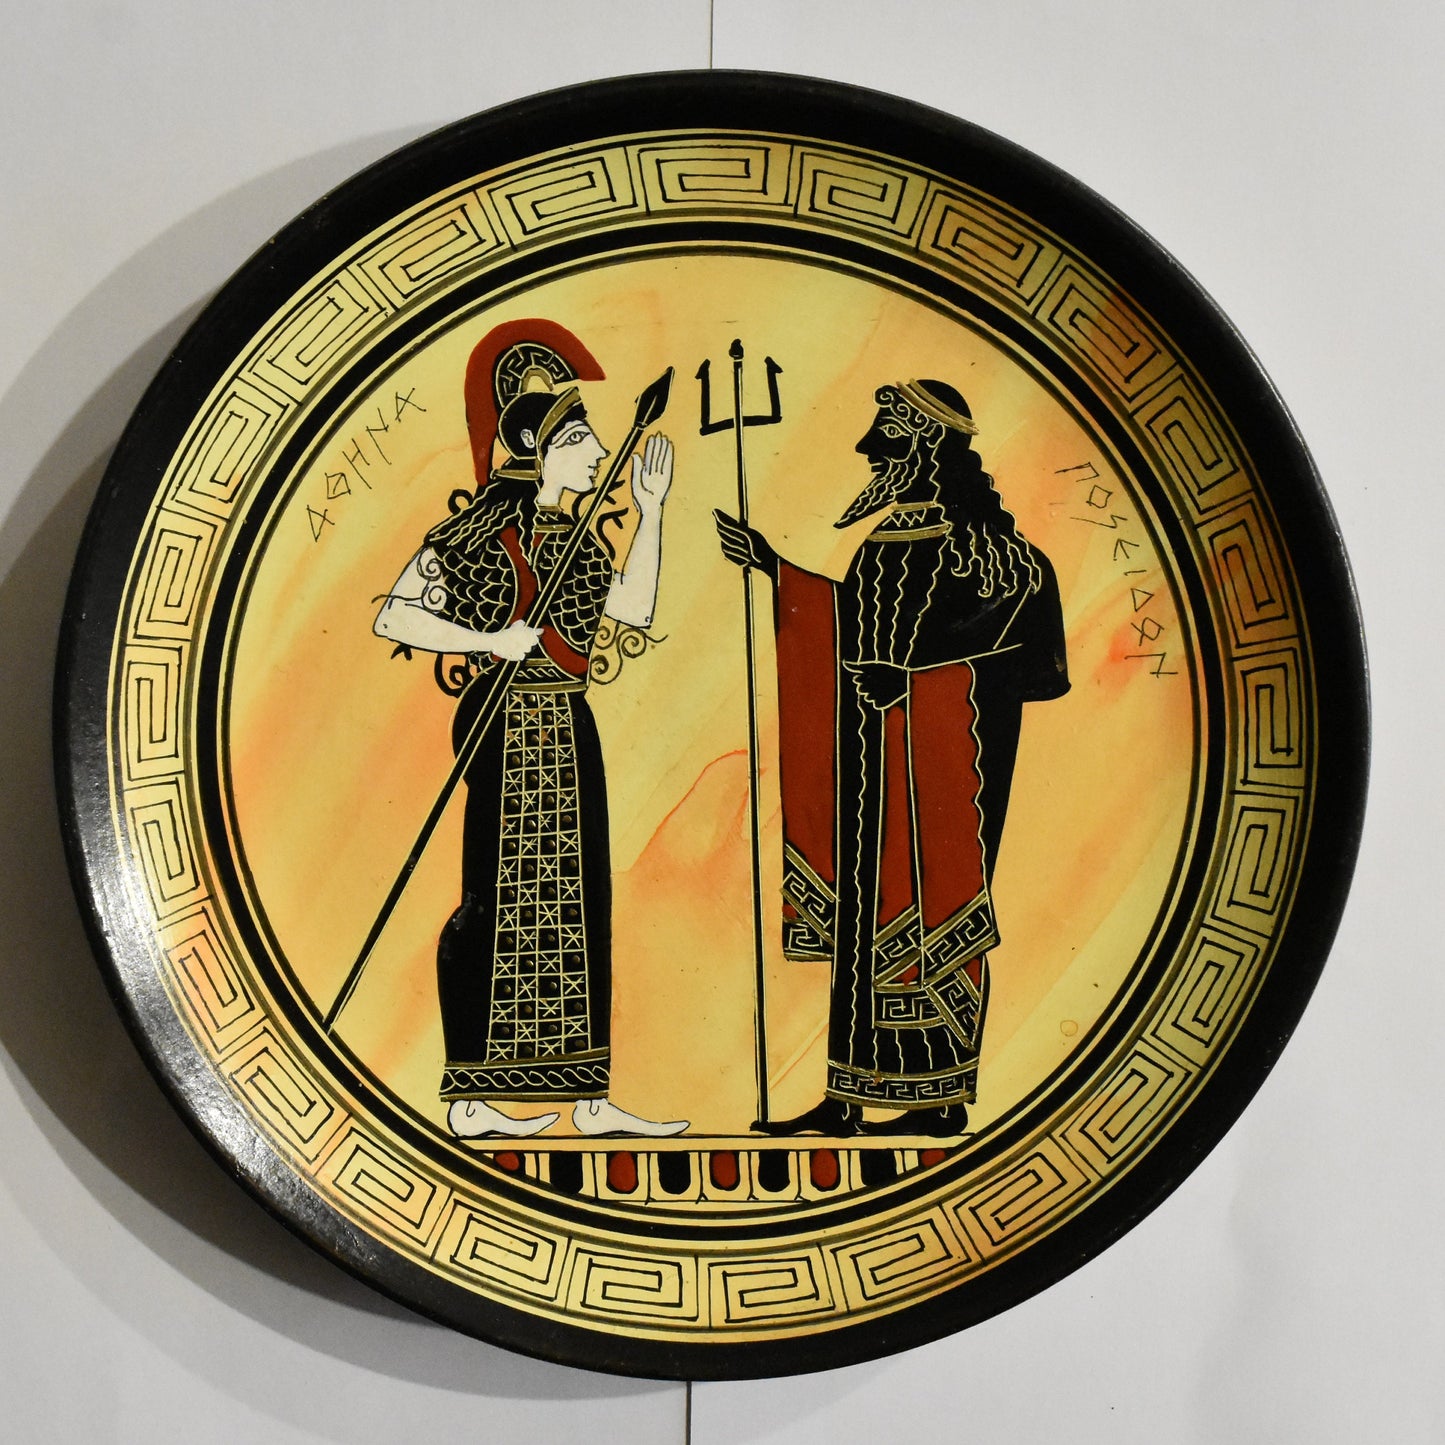 Athena and Poseidon’s Contest for Athens - Ancient Greek Olympian Gods - Ceramic plate - Handmade in Greece